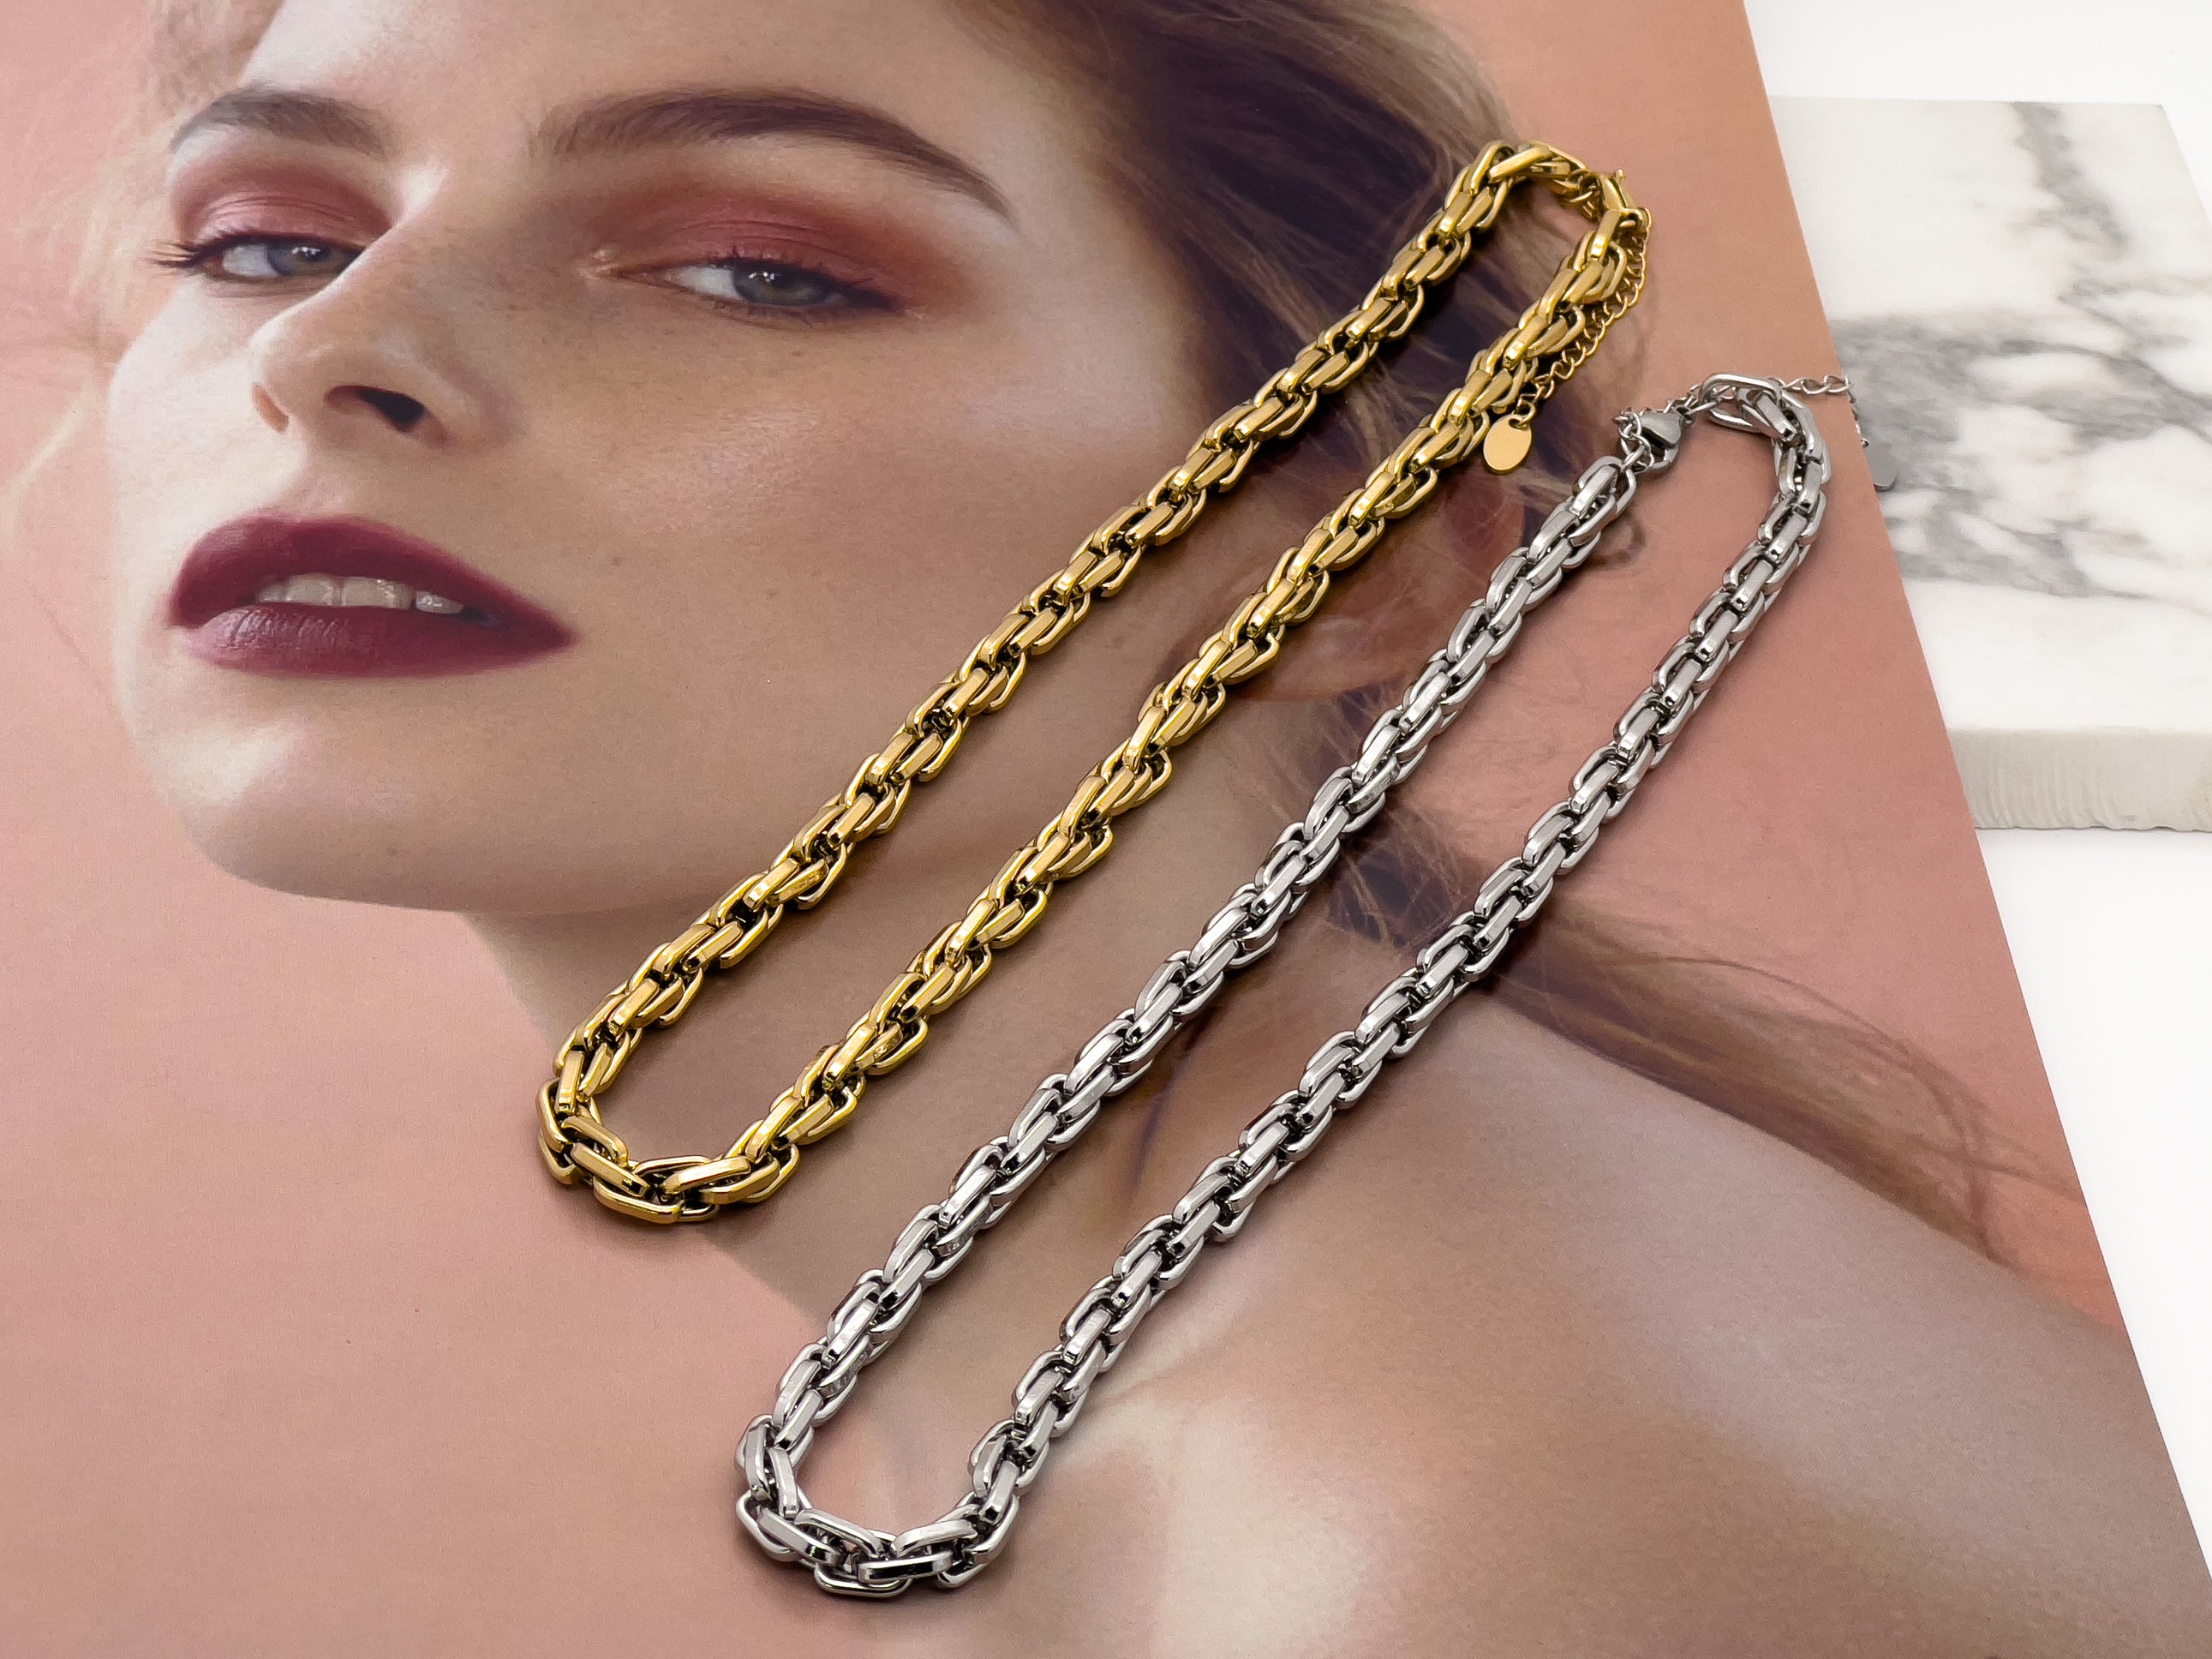 Solid Vibes Chain Necklace in Gold and Silver - Everyday Fashion Jewelry | Chic Chic Bon